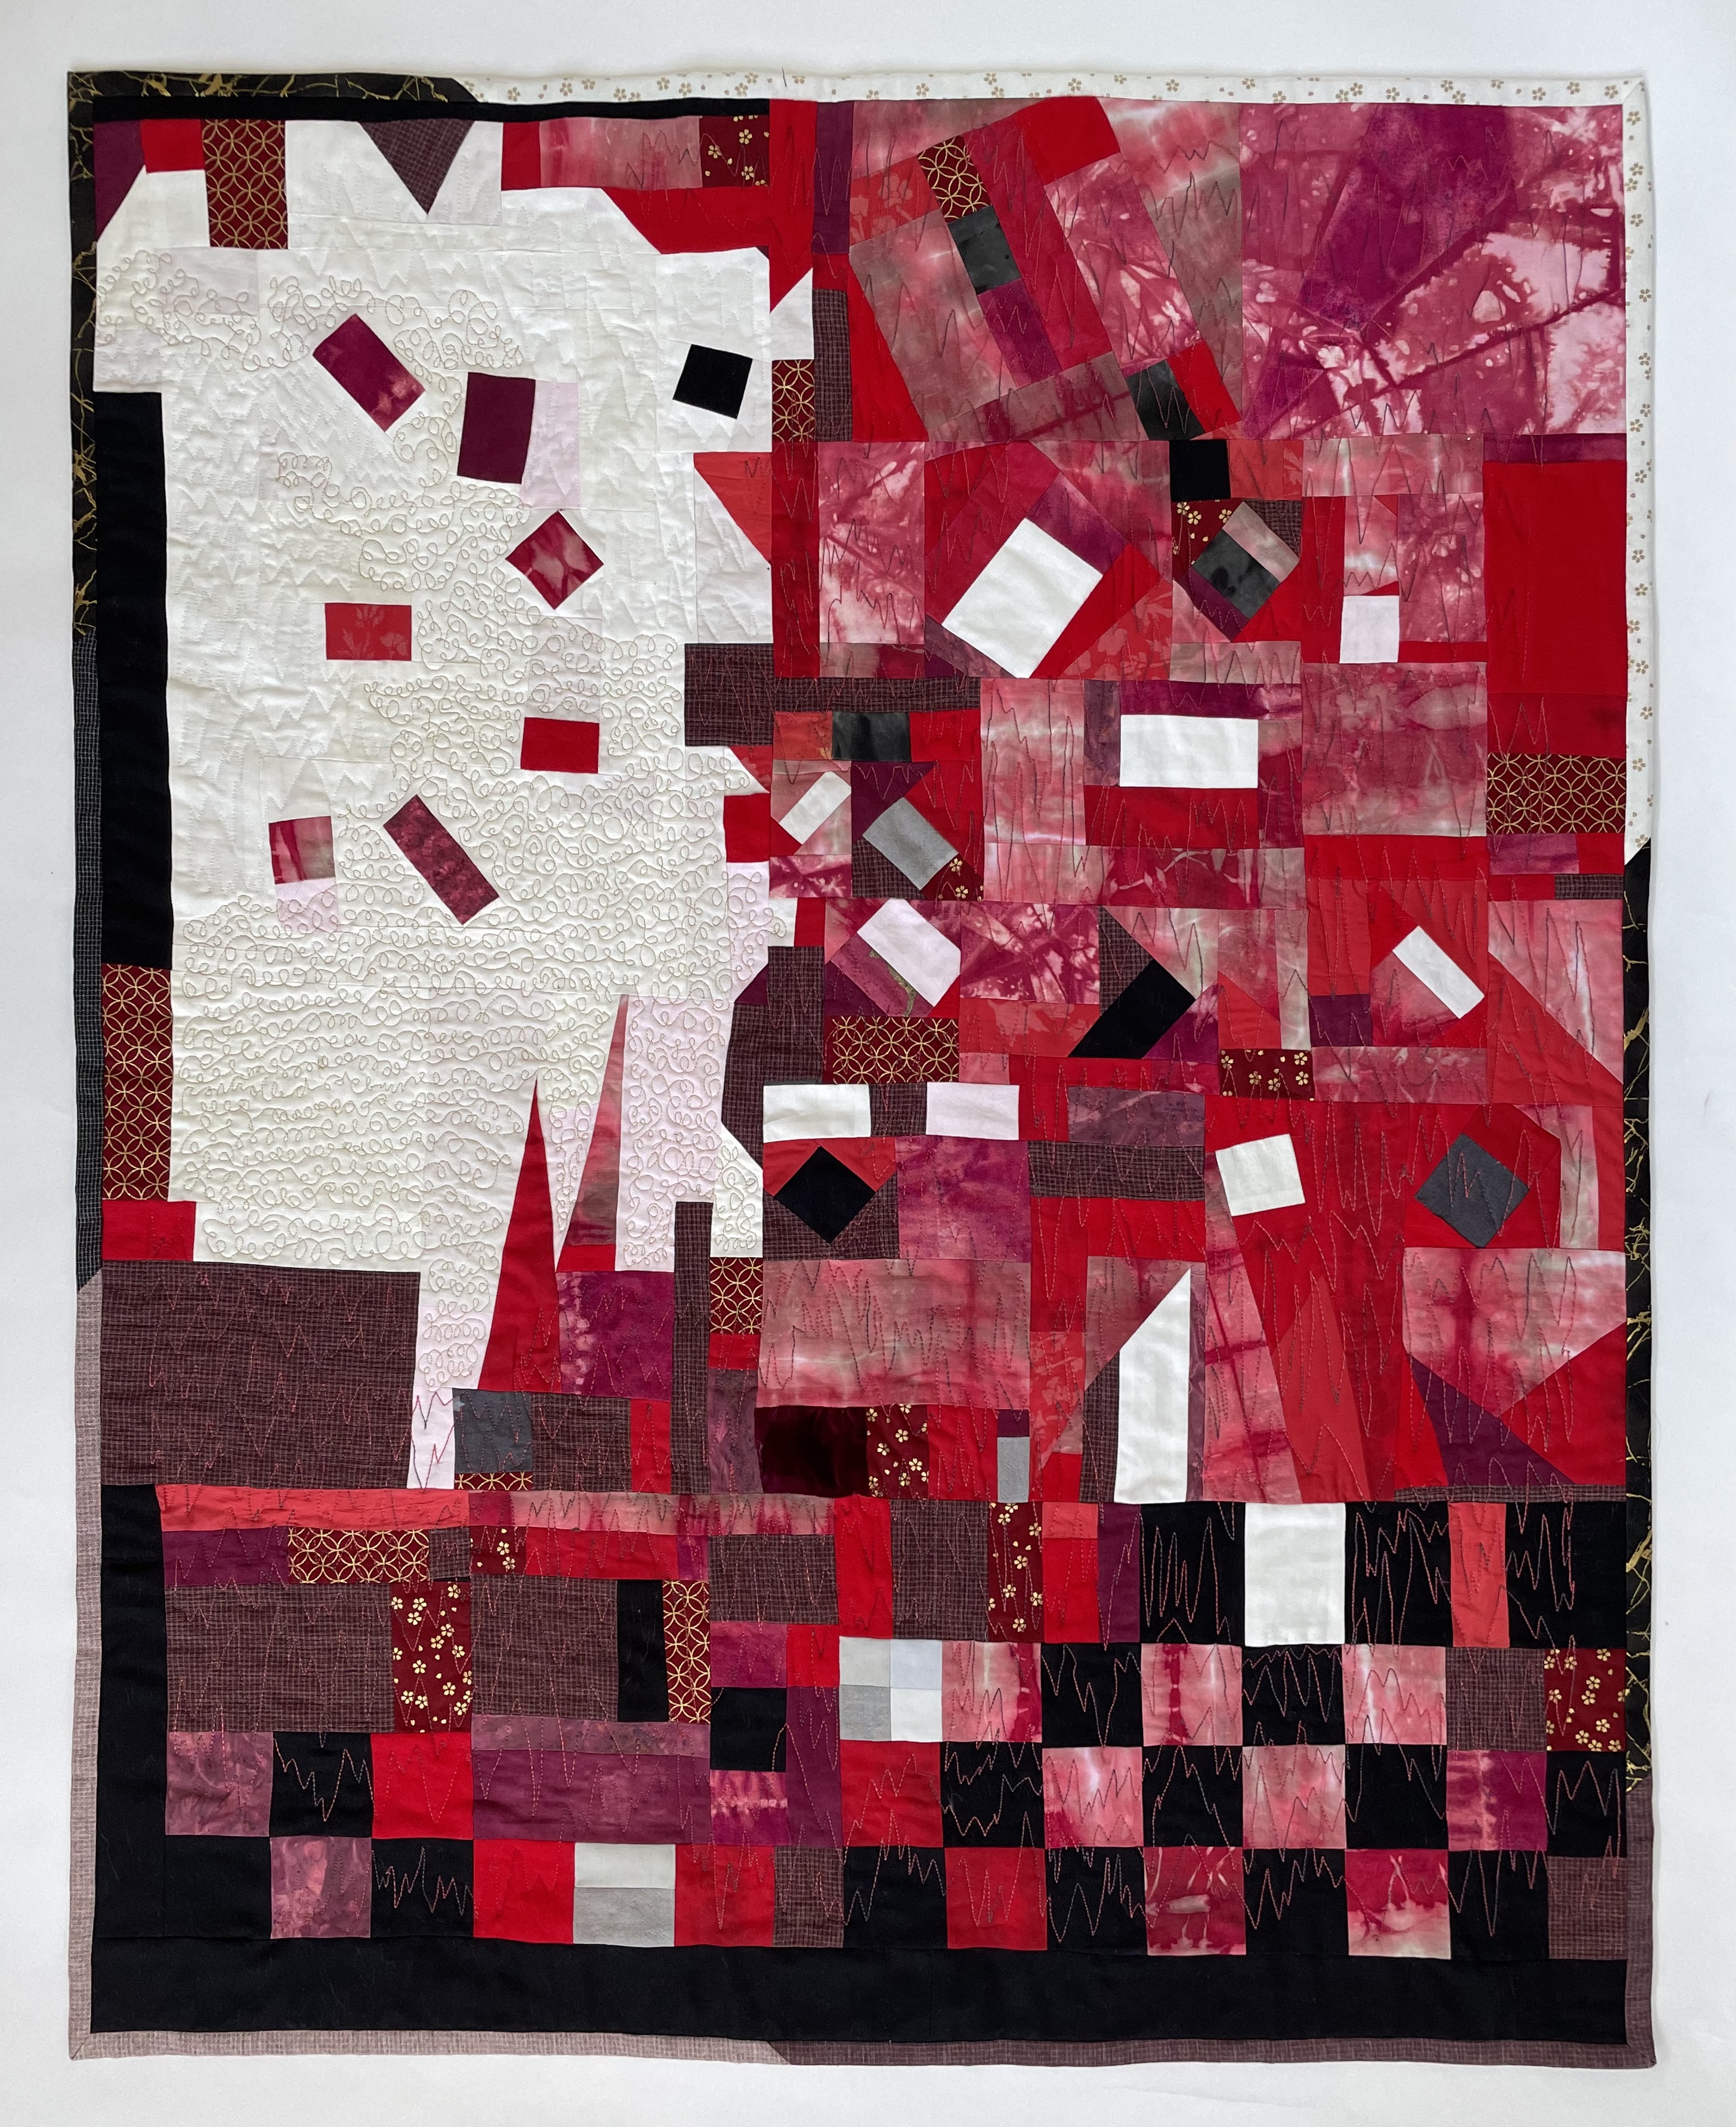 pieced abstract fiery quilt with small shapes askew in a sea of contrasting color